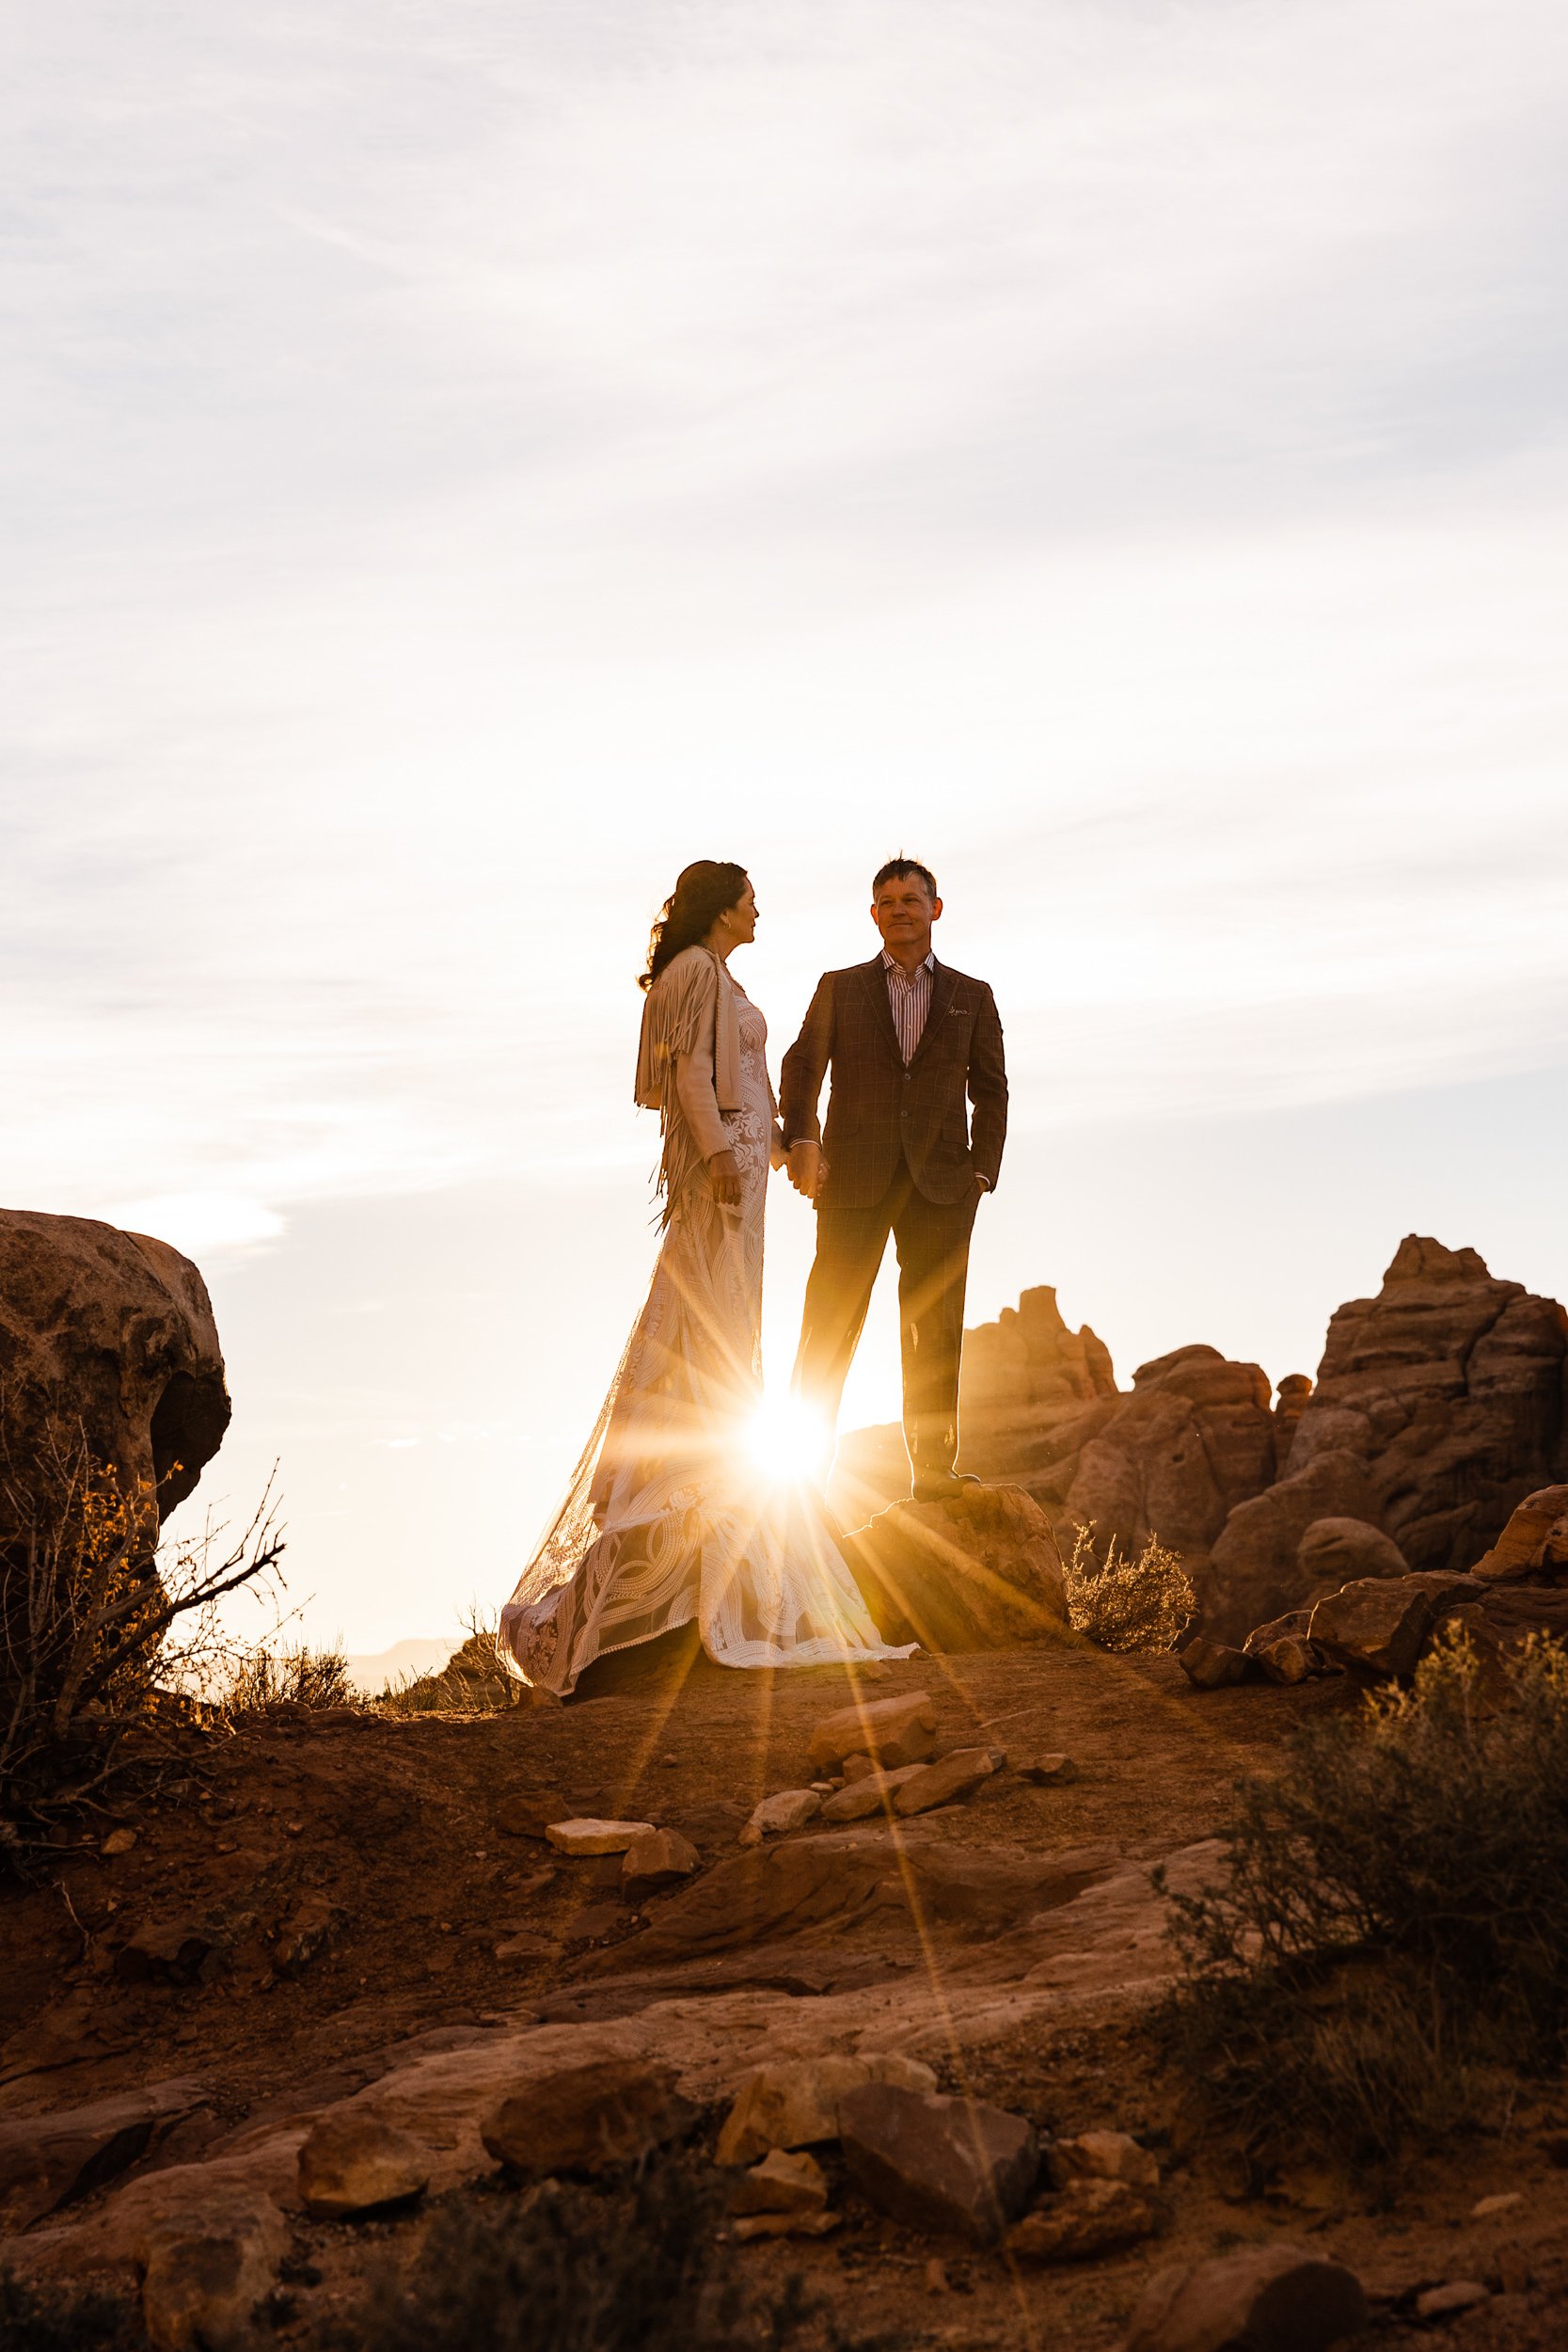 Moab &amp; Amangiri Roadtrip Elopement to Arches National Park | The Hearnes Adventure Photography